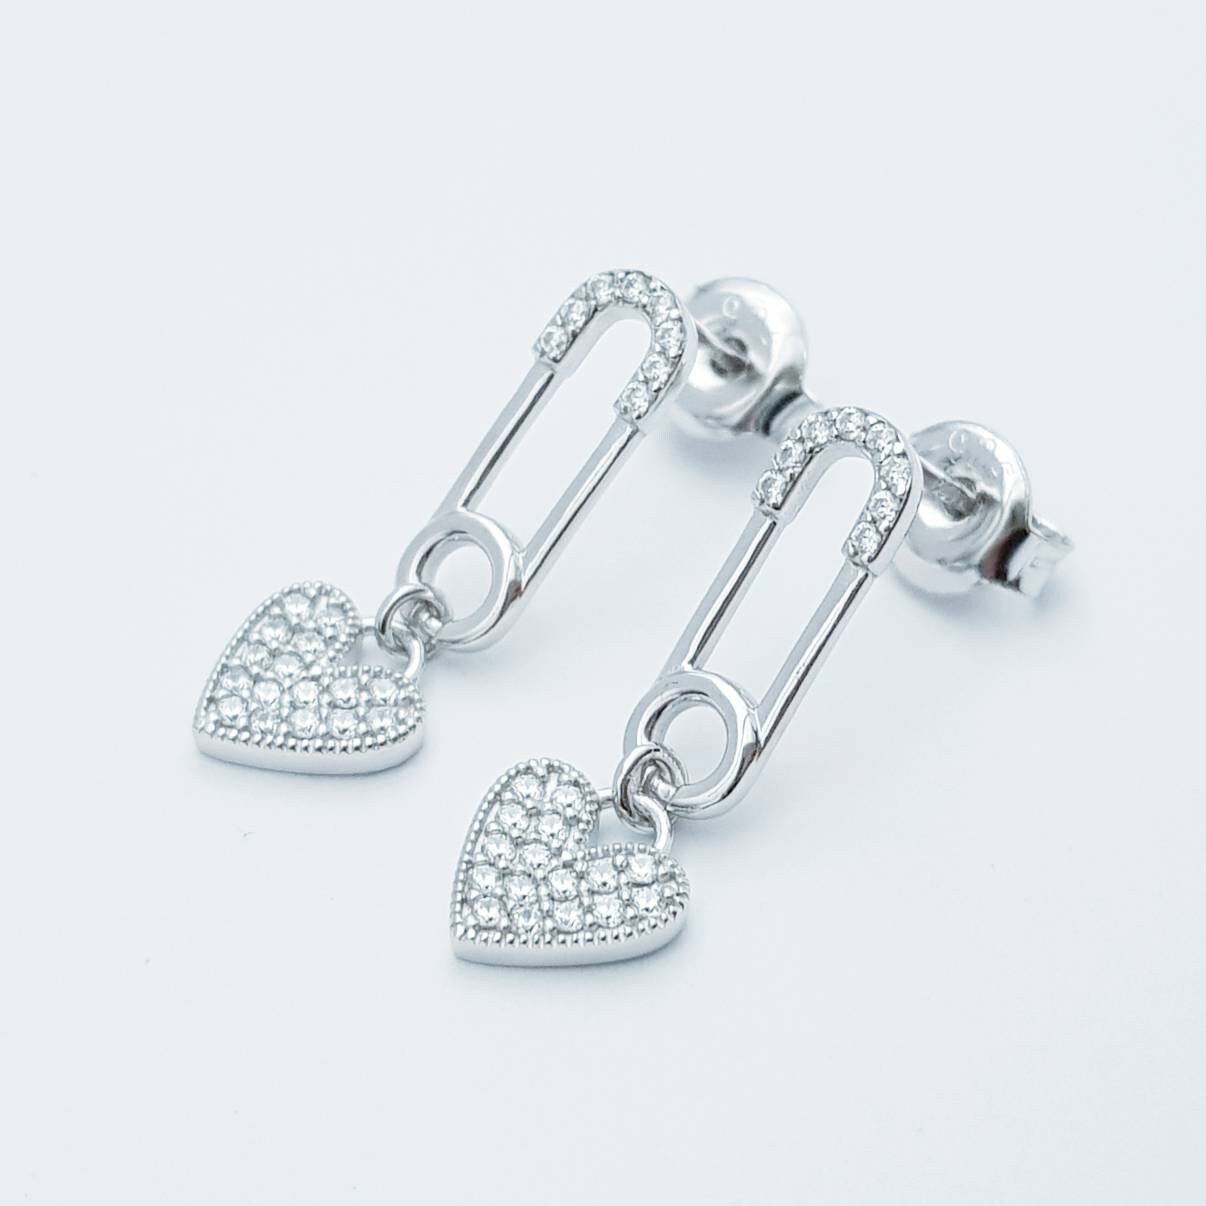 Safety pin and heart earrings, heal my heart studs